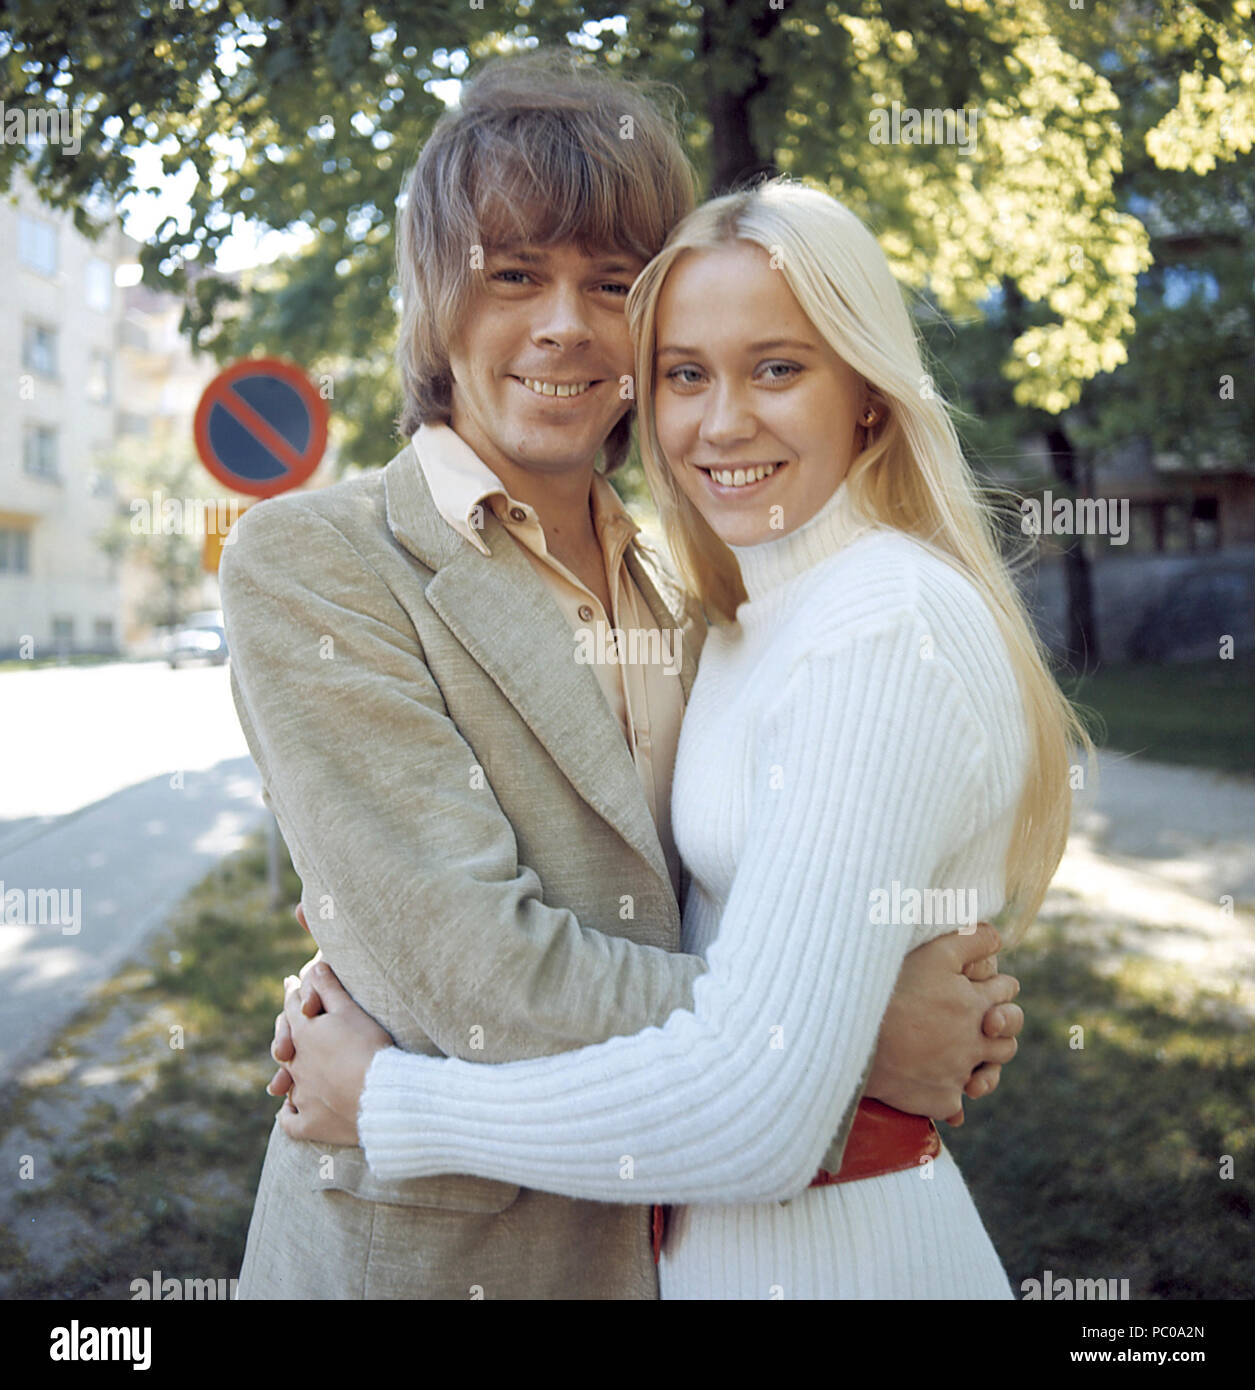 ABBA. Agnetha Fältskog. Singer. Member of the pop group ABBA. Born 1950. Pictured here with her fiance Björn Ulvaeus 1970 whom she married on 6 July 1971. Photo: Kristoffersson Stock Photo